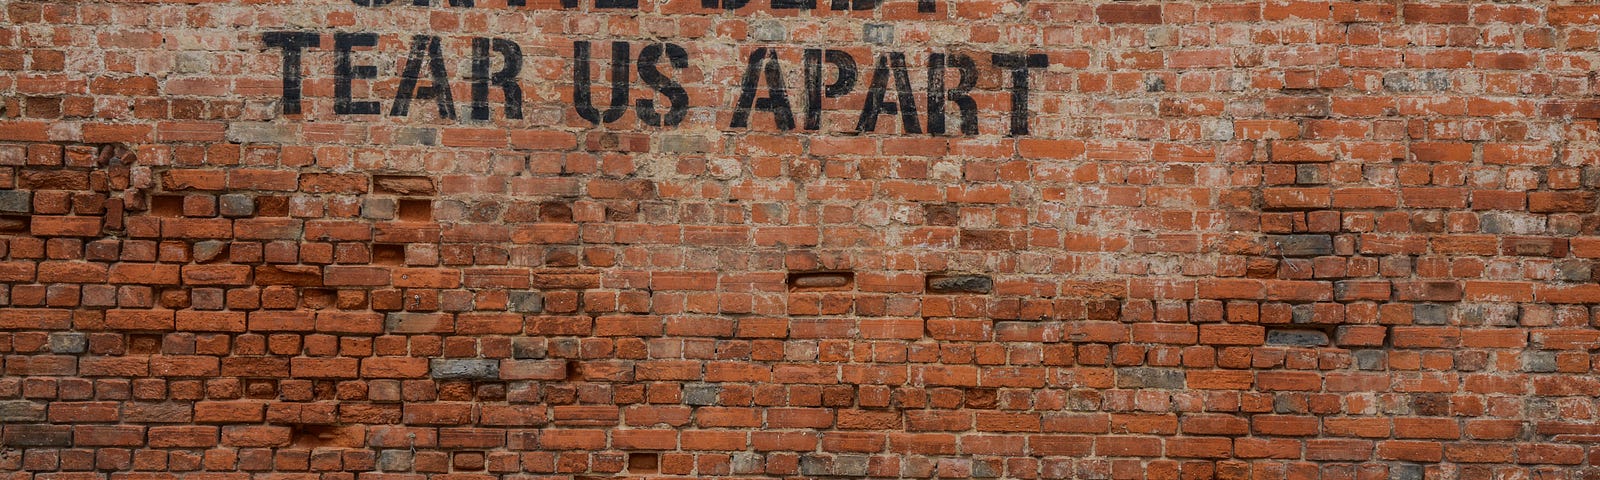 Wall with until debt tear us apart painted on it